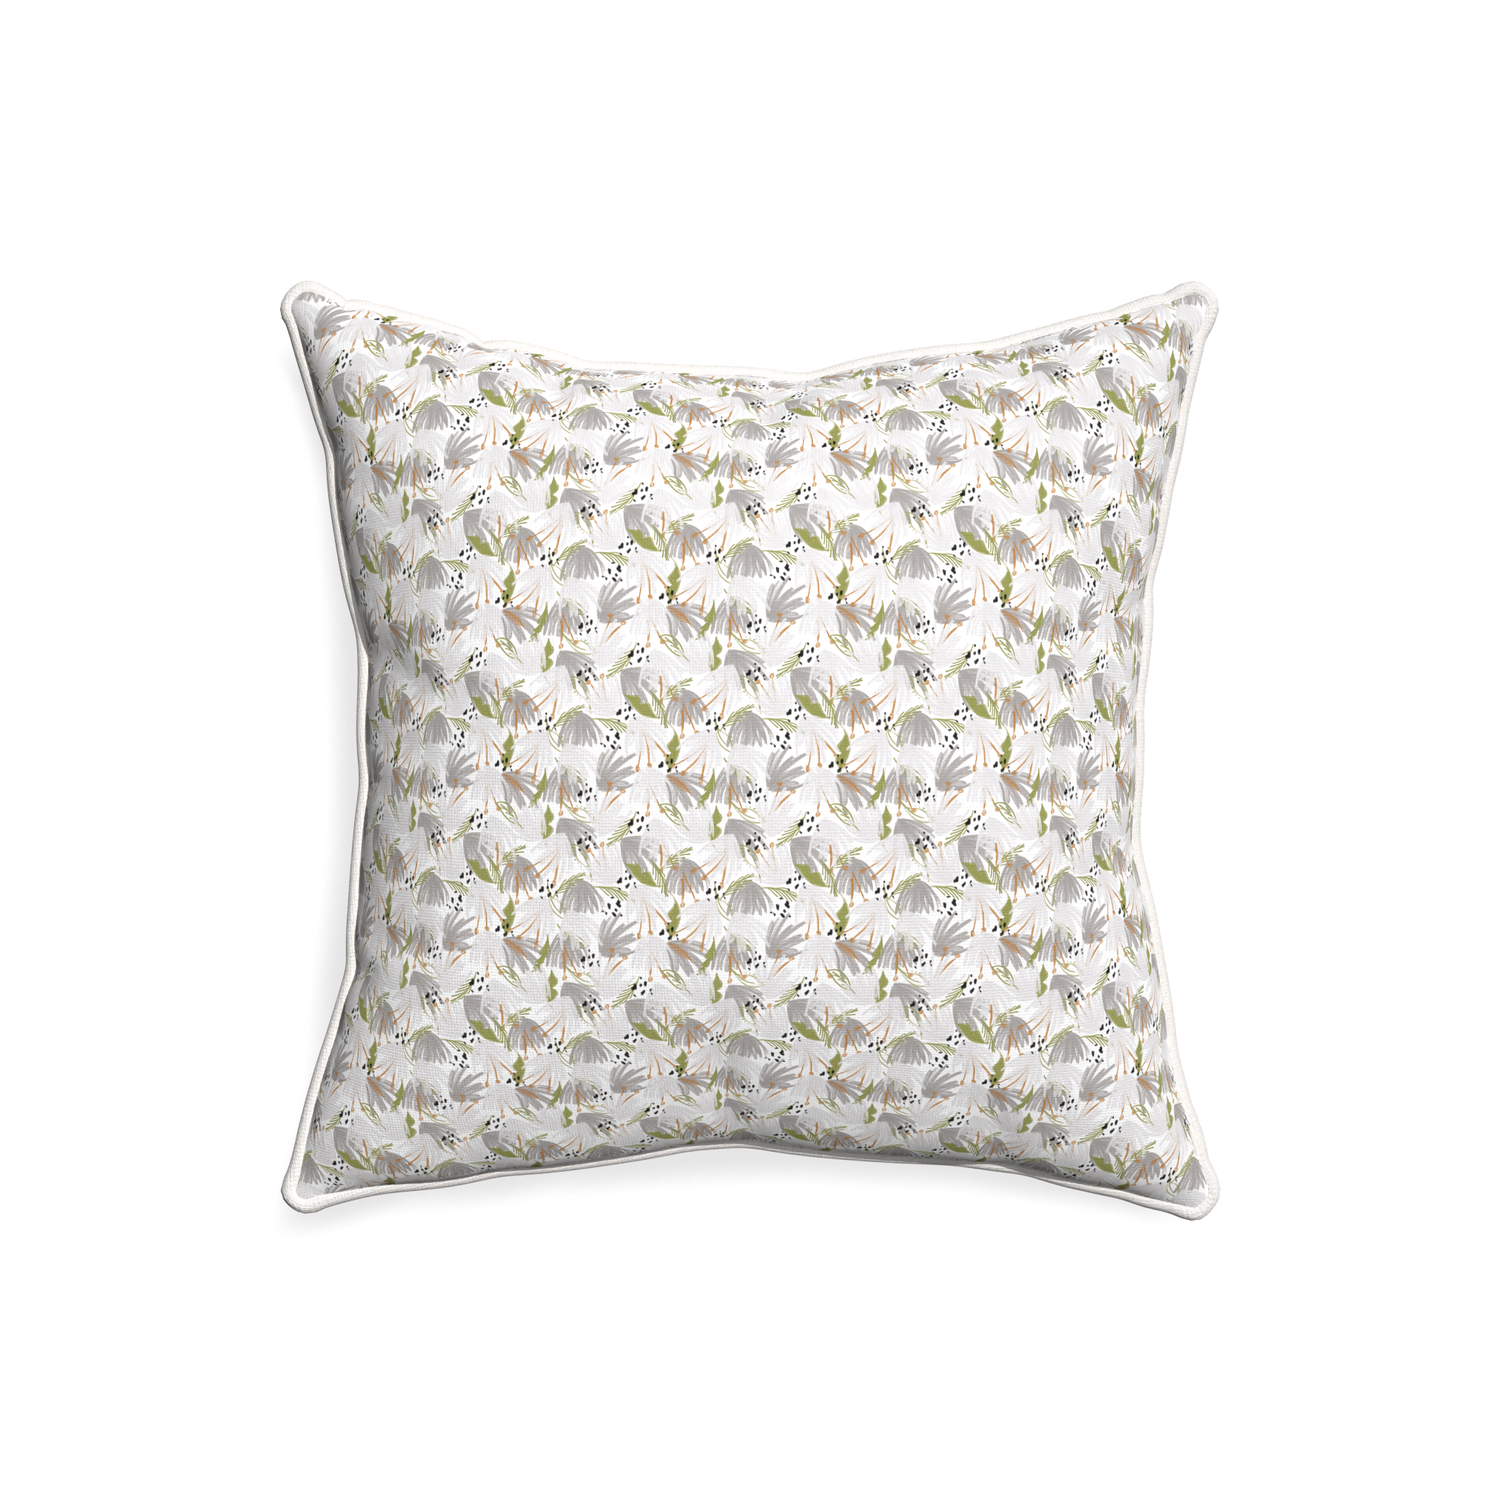 20-square eden grey custom grey floralpillow with snow piping on white background